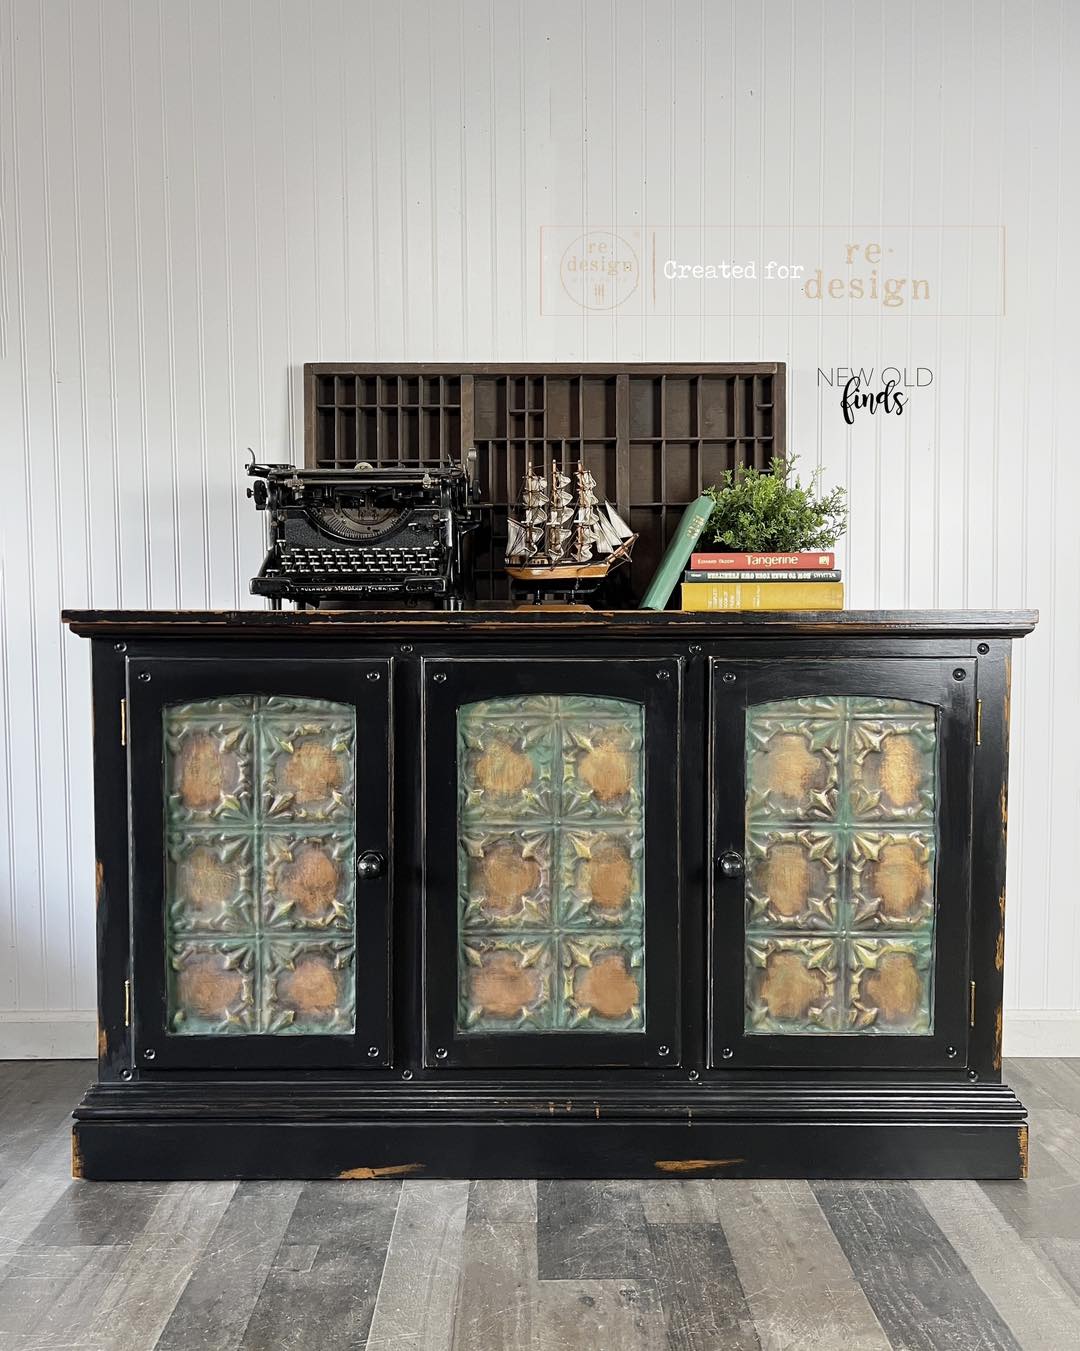 New Old Finds by Roz Robertson Black Cabinet